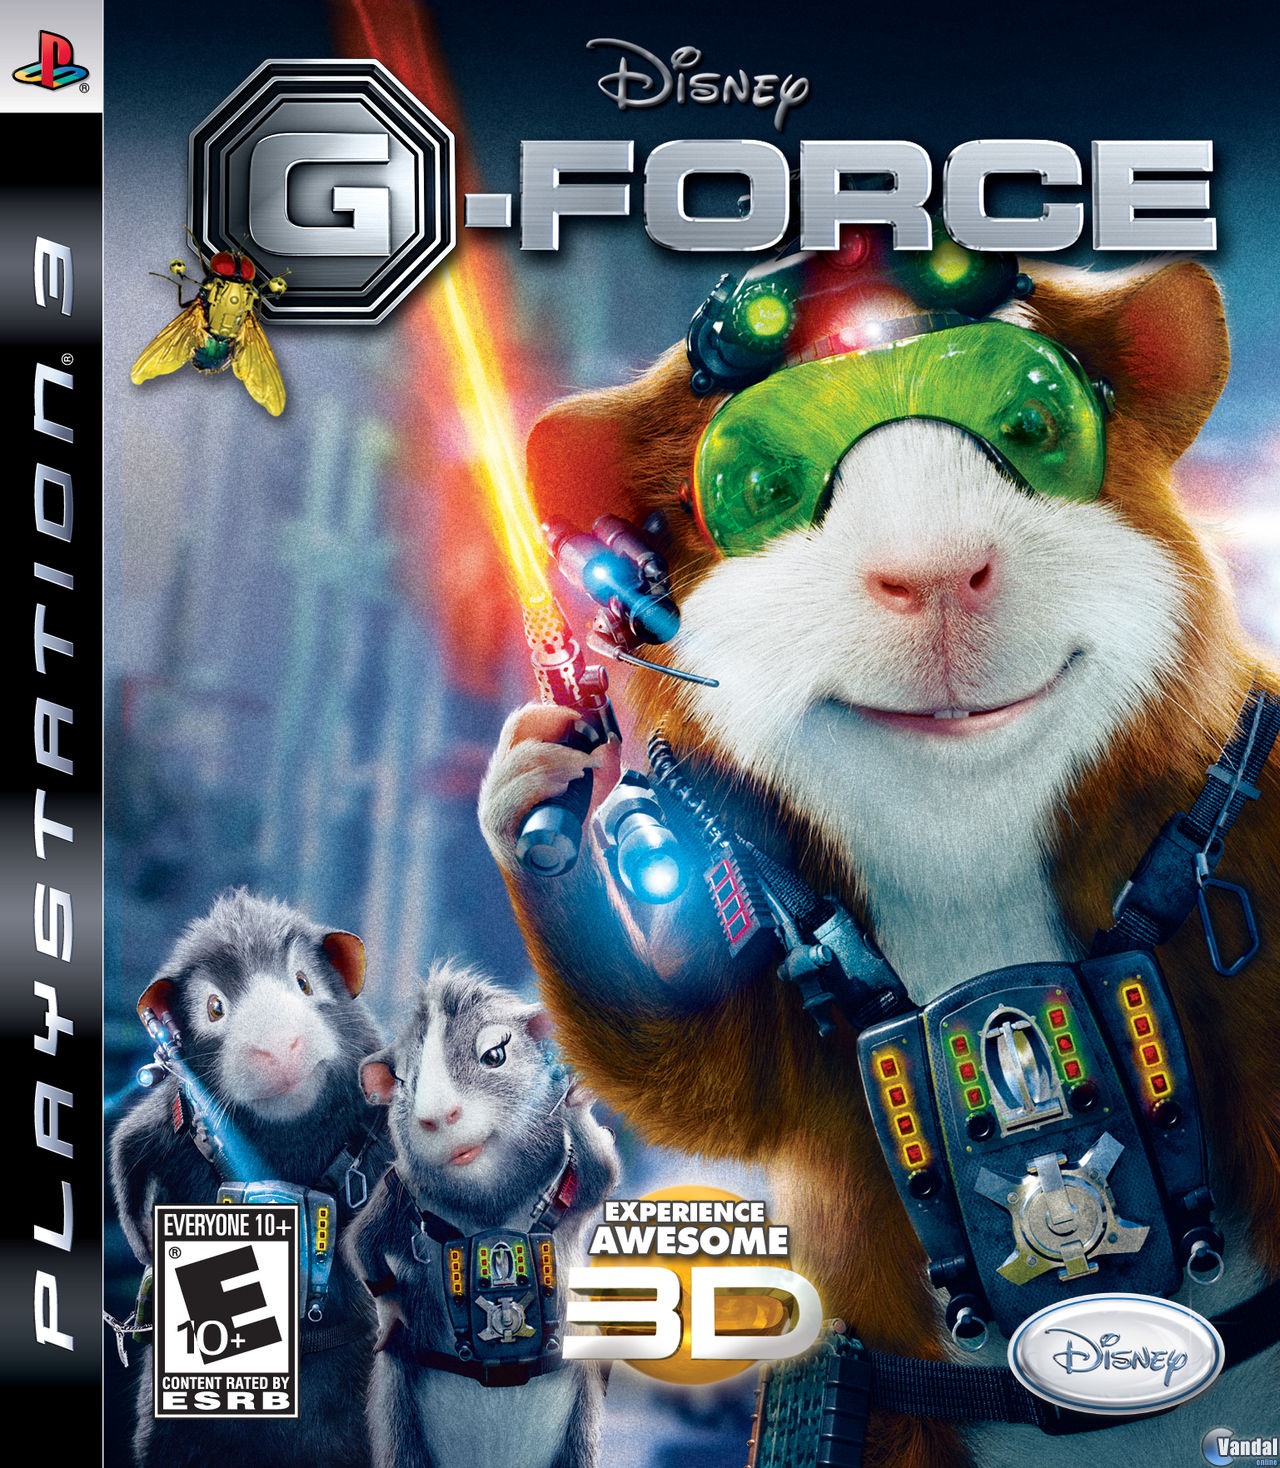 aritmética Bolos estaño G-Force - Videojuego (PS3, PS2, Wii, PSP, PC, Xbox 360 y NDS) - Vandal